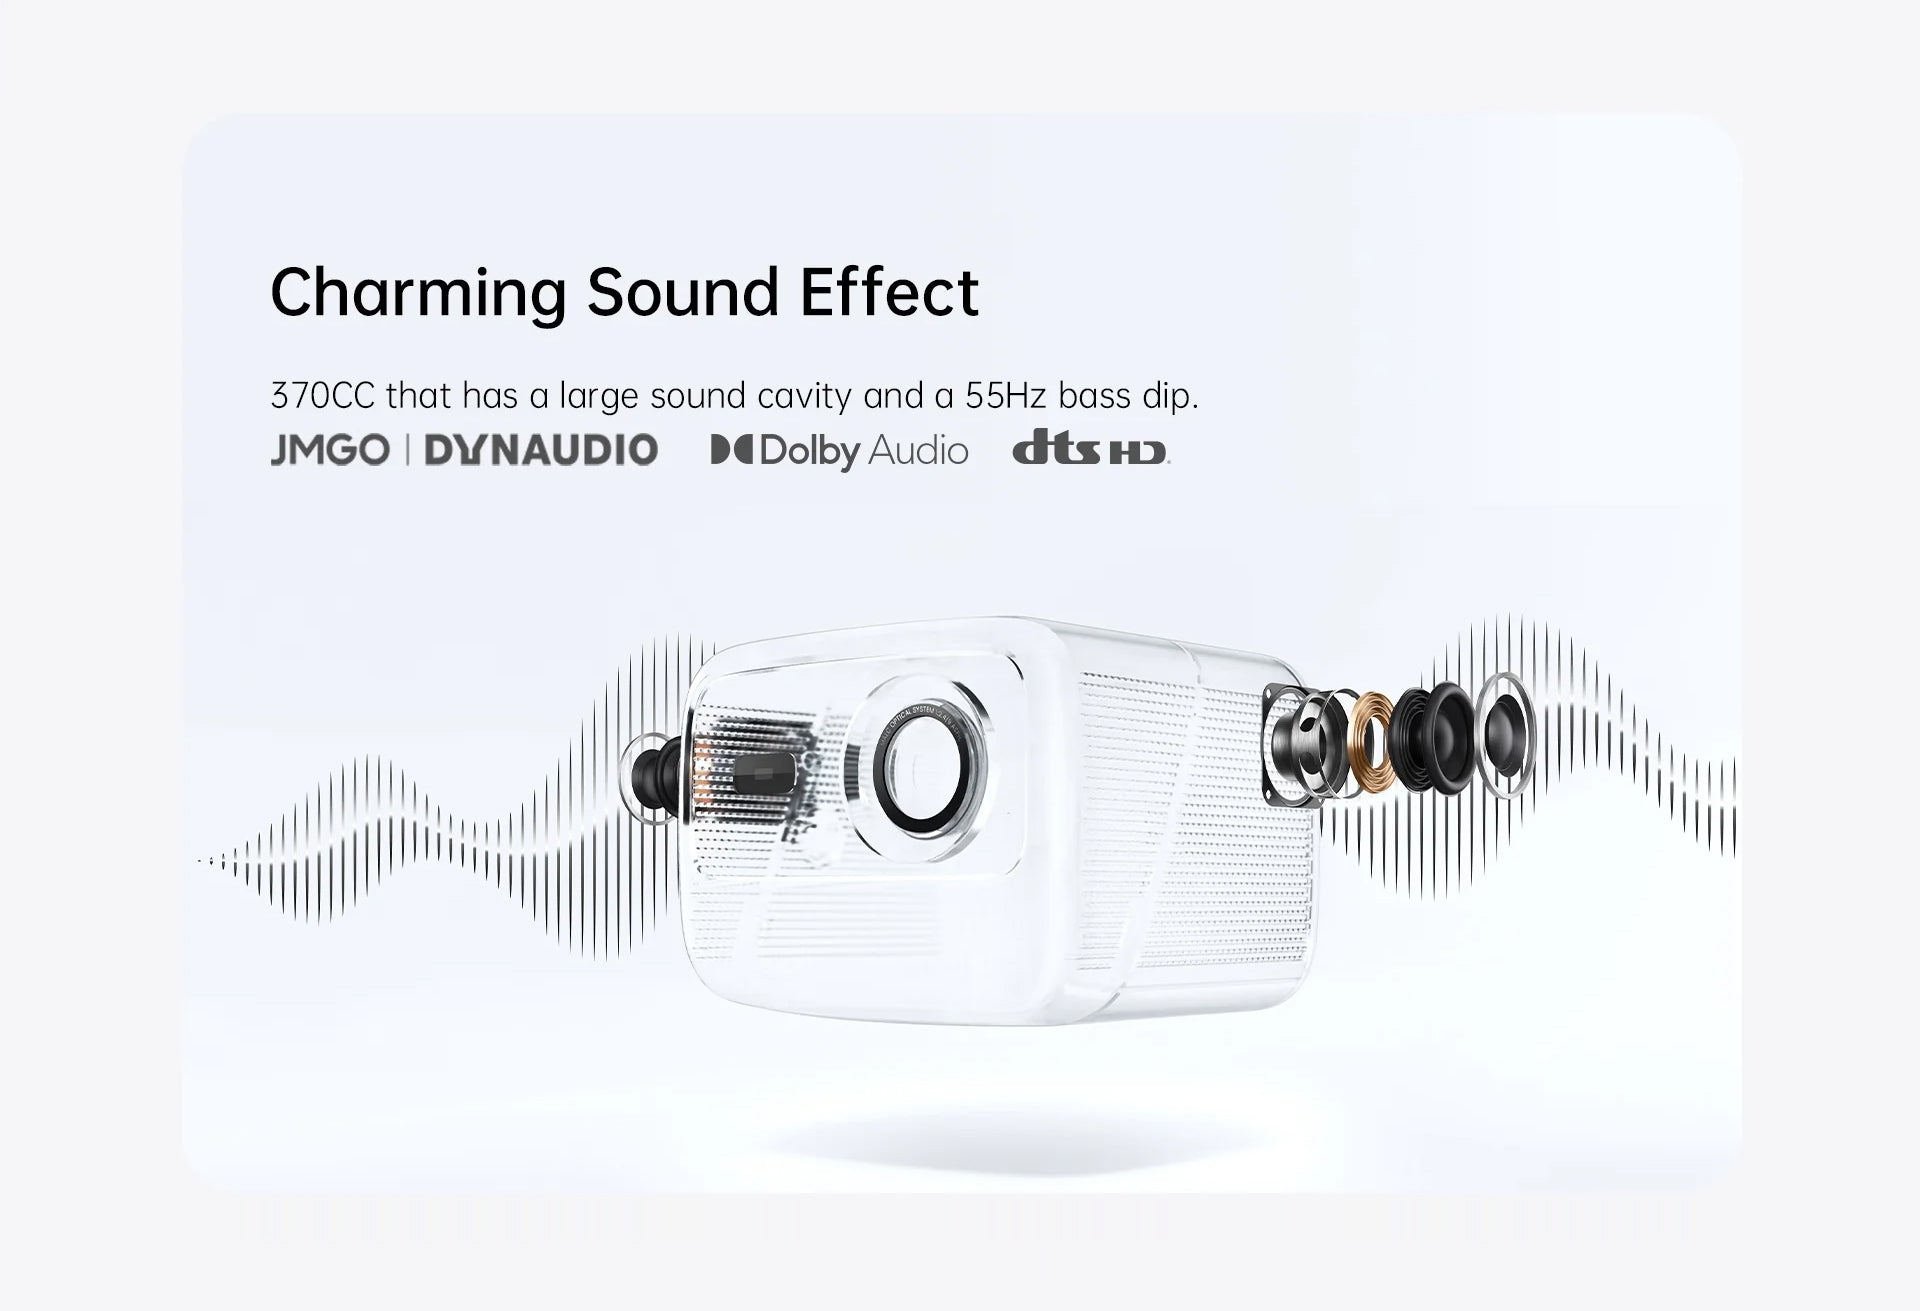 jmgo n1 Collaboration with Dynaudio, 370cc Sound Chamber, Captivating Bass at 55Hz, Resonating with Heart and Ears